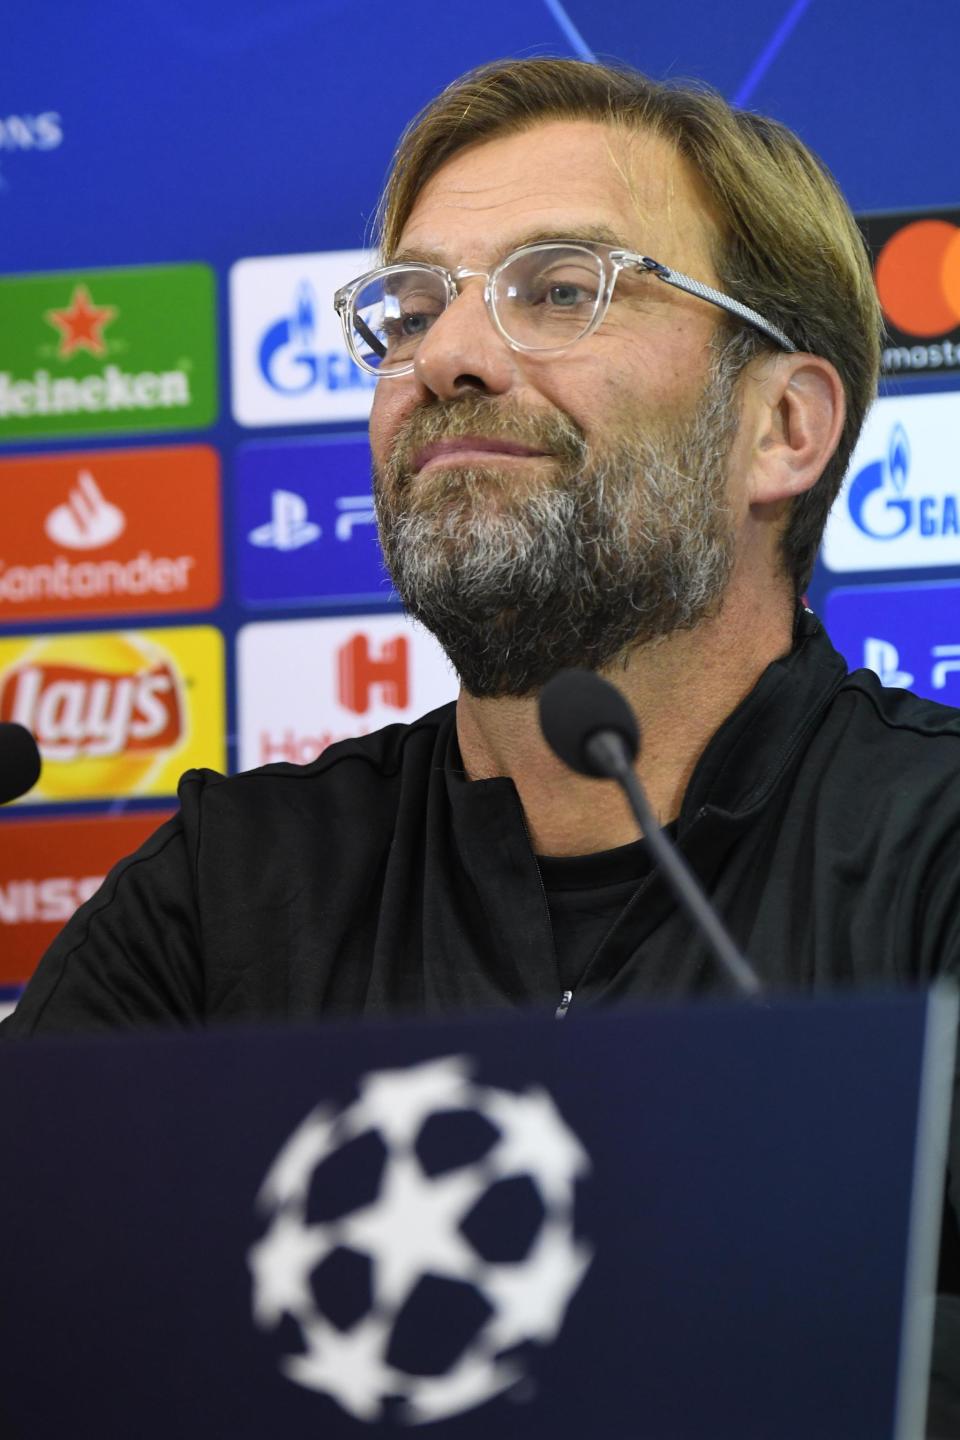 Liverpool coach Jurgen Klopp attends a news conference ahead of Wednesday's Champions League, Group C soccer match against Napoli, in Naples, Italy, Tuesday, Oct. 2, 2018. (Ciro Fusco/ANSA via AP)